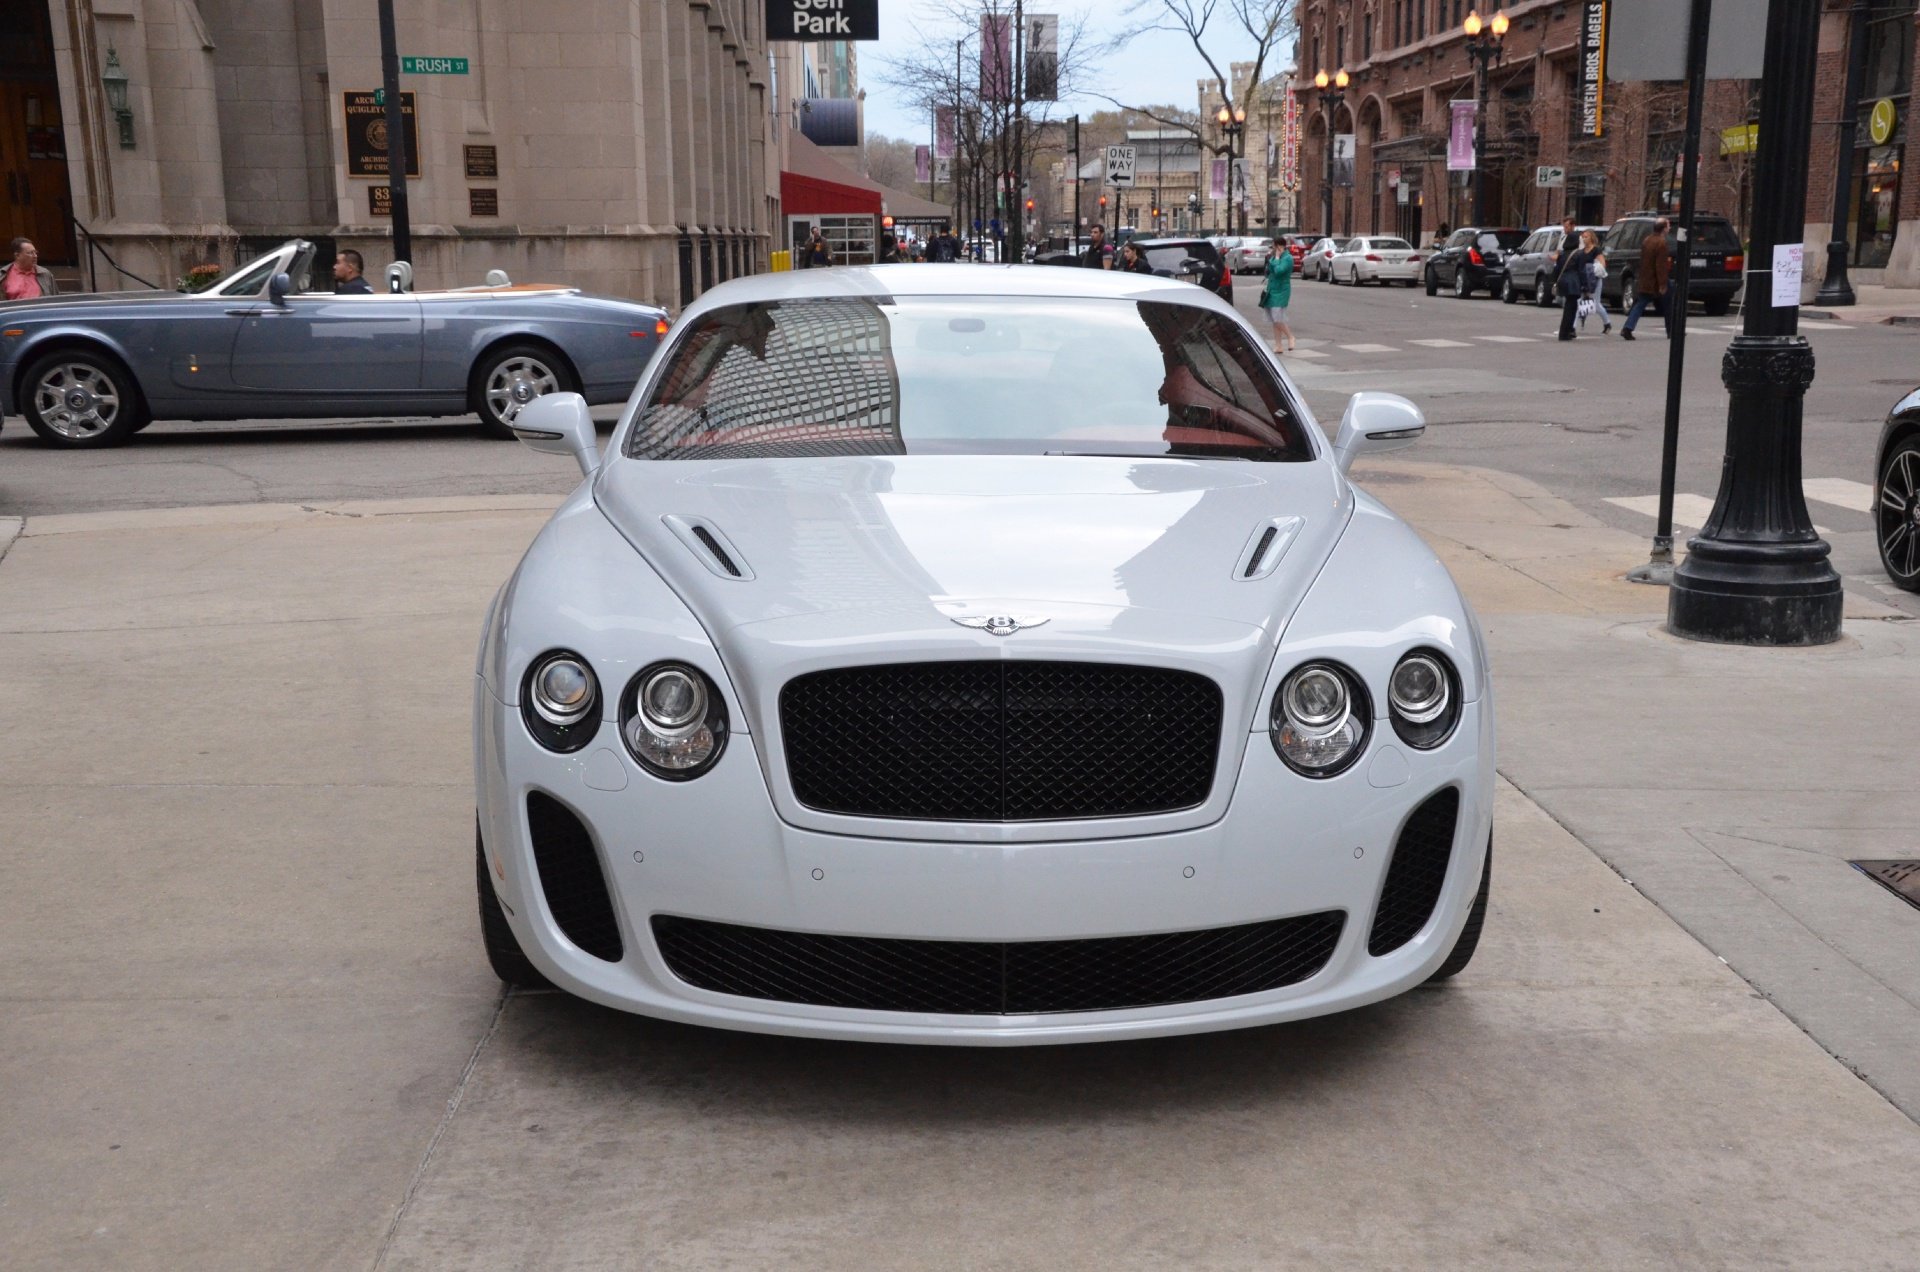 2010, Bentley, White, Continental, Supersports, Coupe, Uk Wallpaper